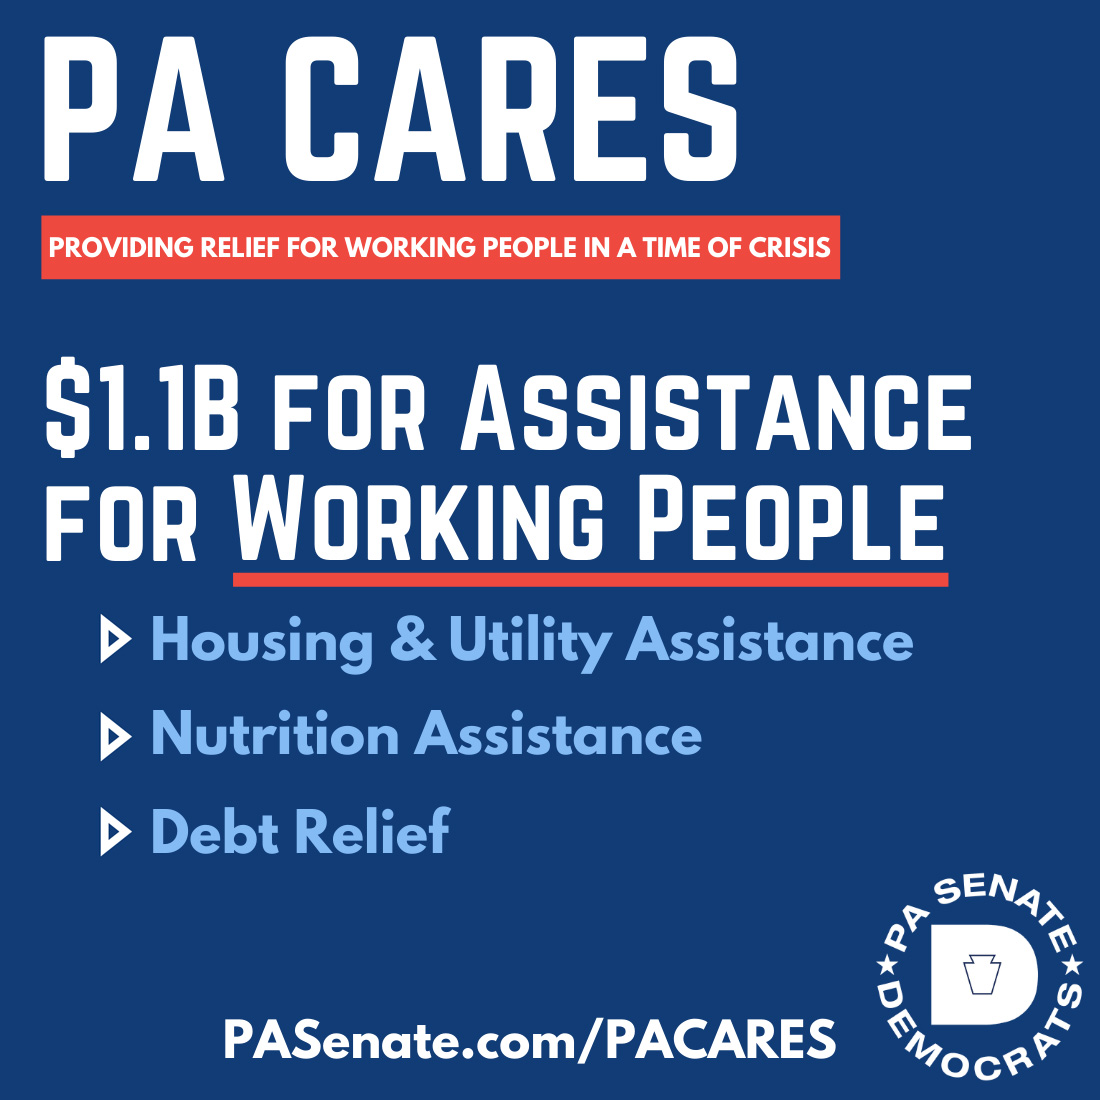 PA CARES - $2.1B for assistance for working people